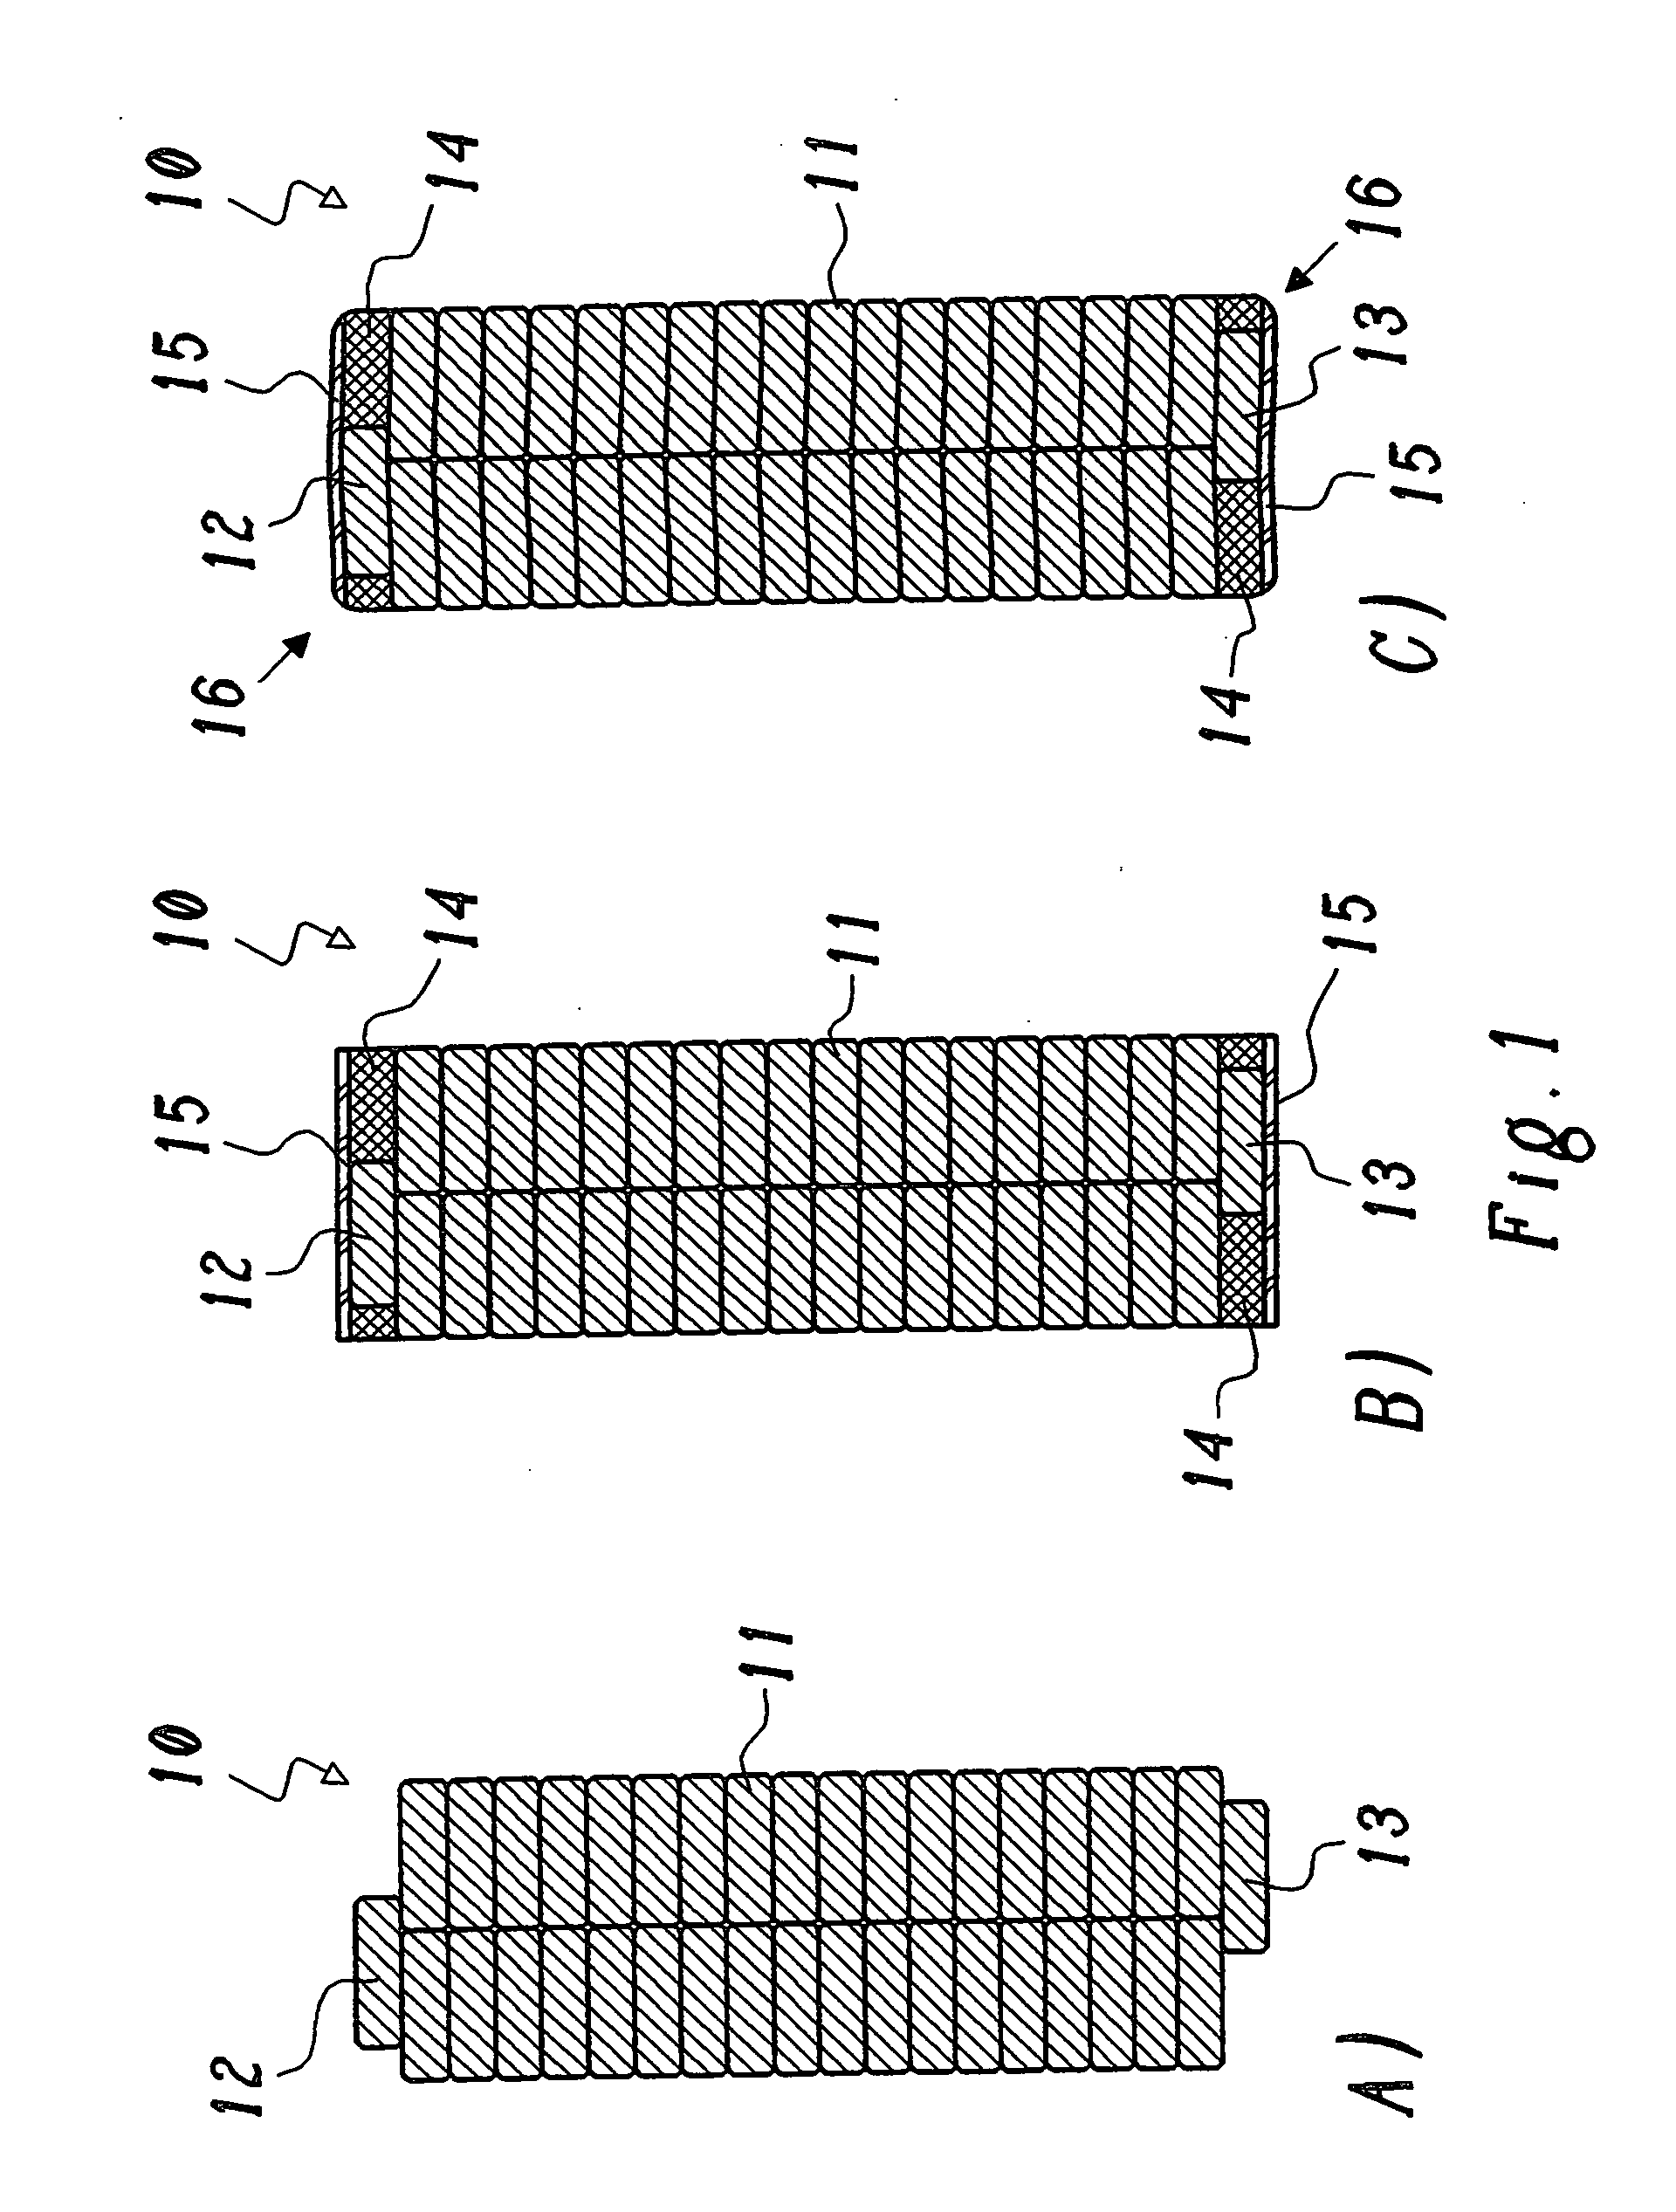 Roebel bar for an electrical machine and method for producing such a roebel bar